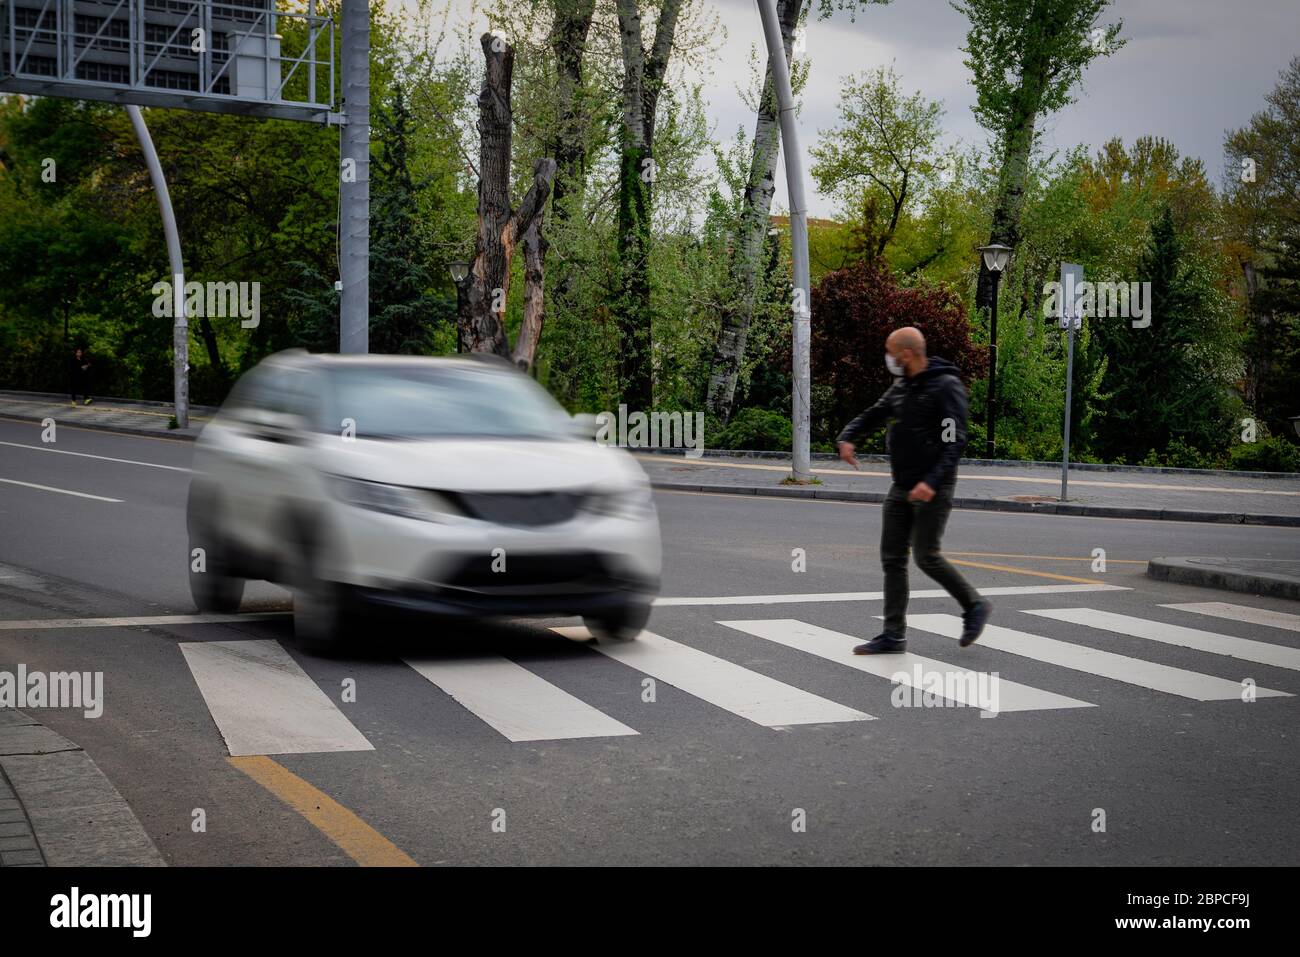 Pedestrian walking on zebra crossing and a driving car failing to stop in blurred motion. Pedestrian reacts with hand to the driver. Stock Photo